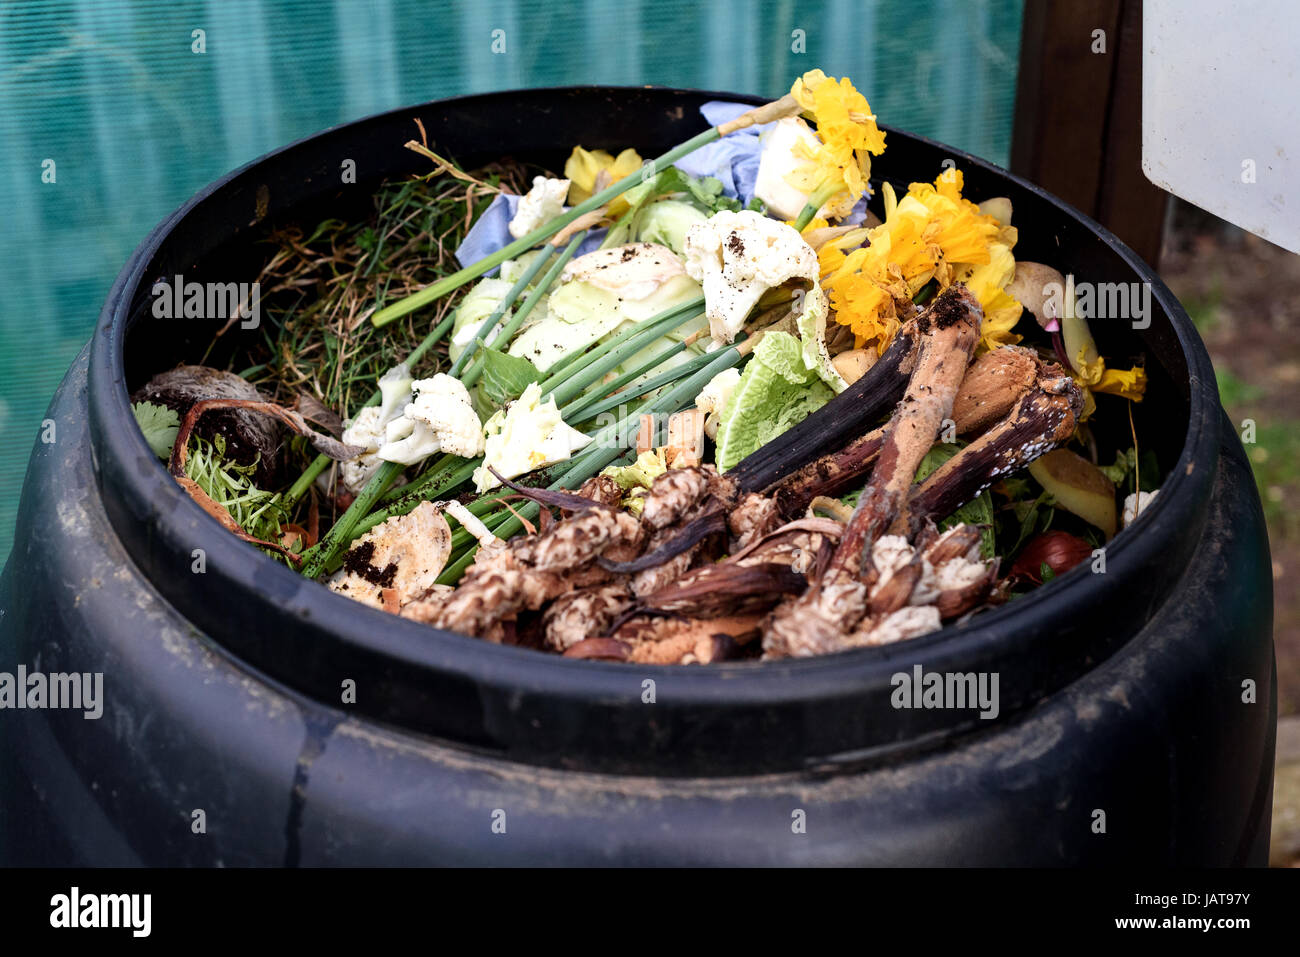 Everyday garden compost bin popular with many gardeners as a way to recycle kitchen waste Stock Photo